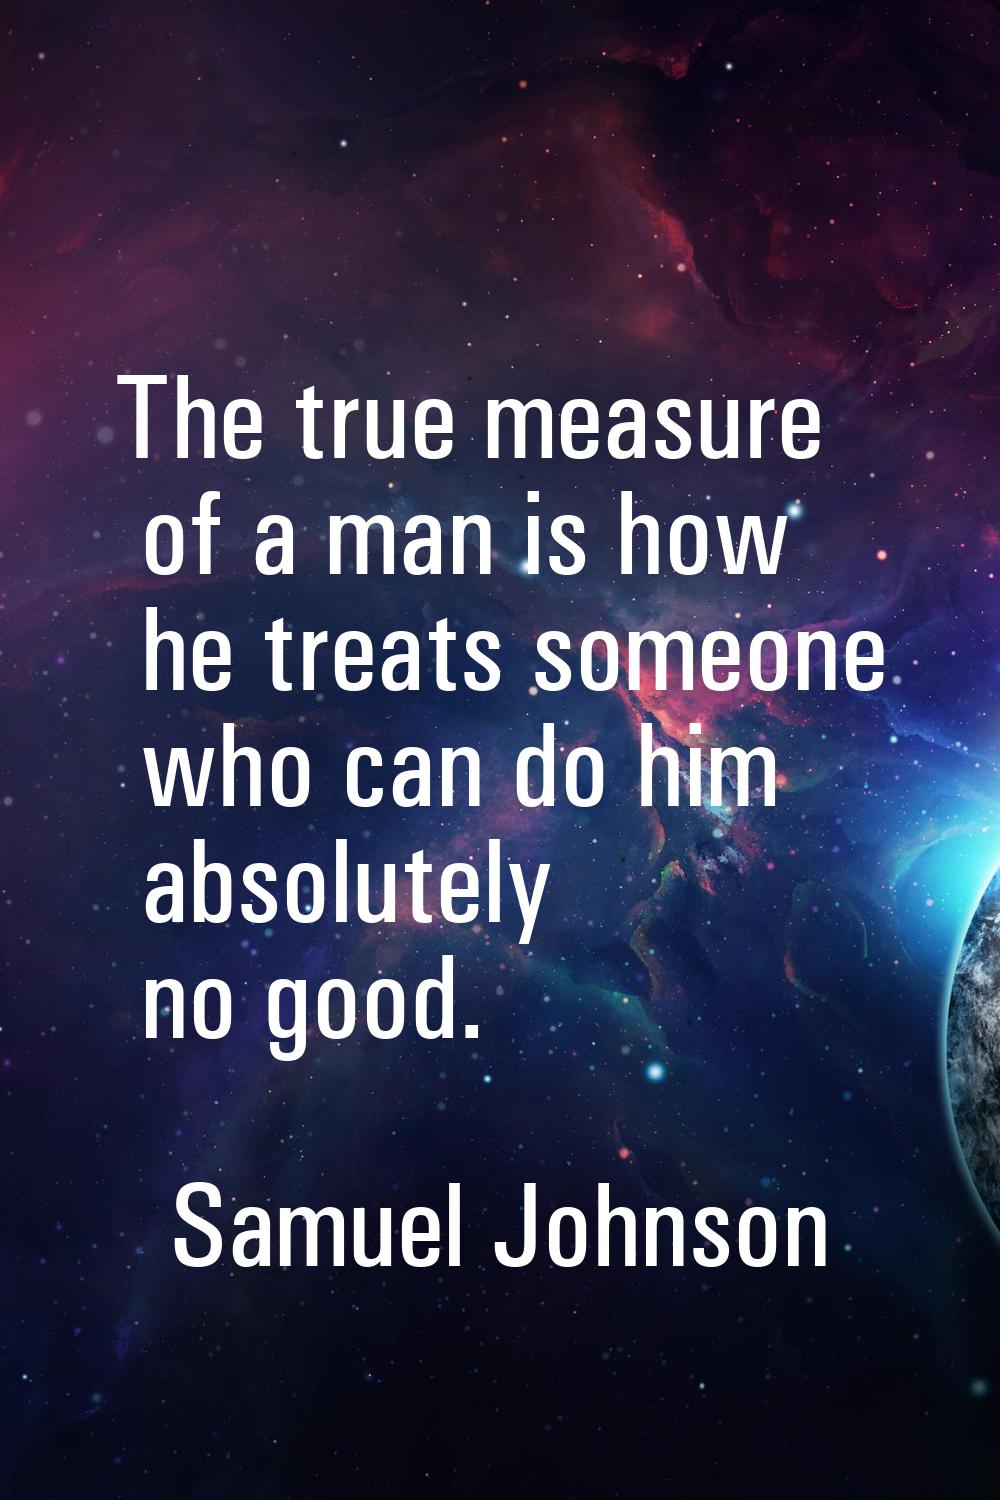 The true measure of a man is how he treats someone who can do him absolutely no good.